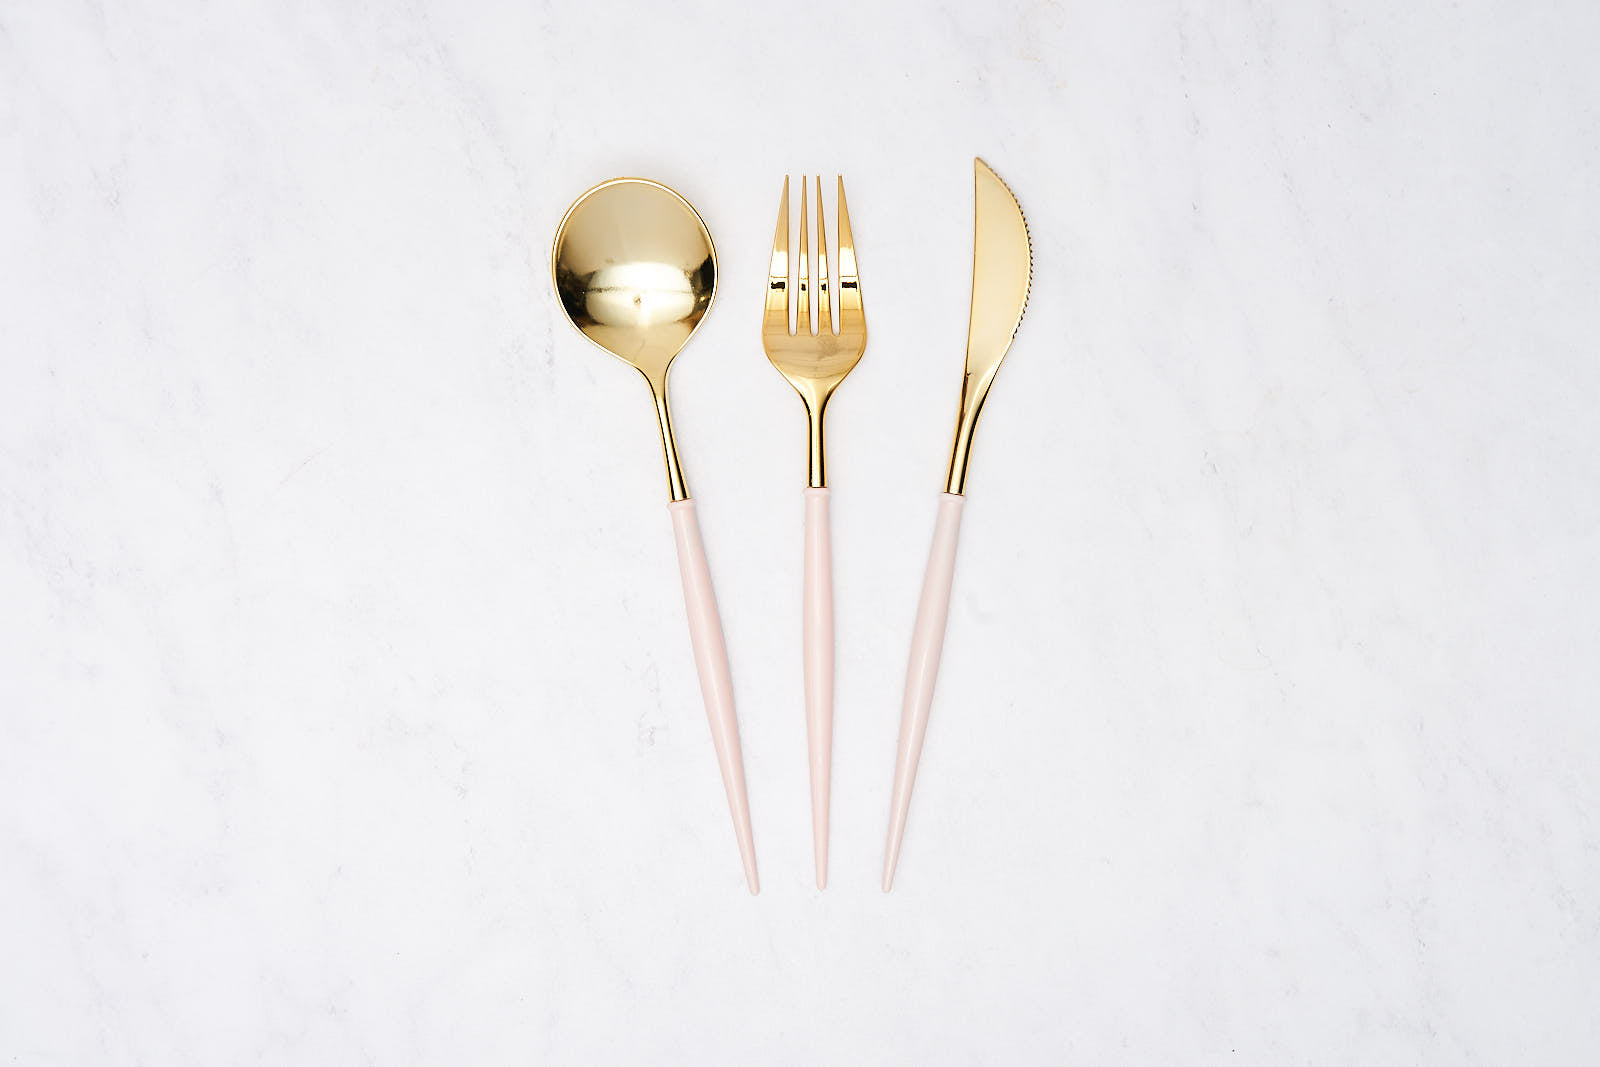 Bella Plastic Cutlery in Gold and Pink featuring a spoon, fork, and knife, showcasing a sleek modern design perfect for elevating any table setting or event.